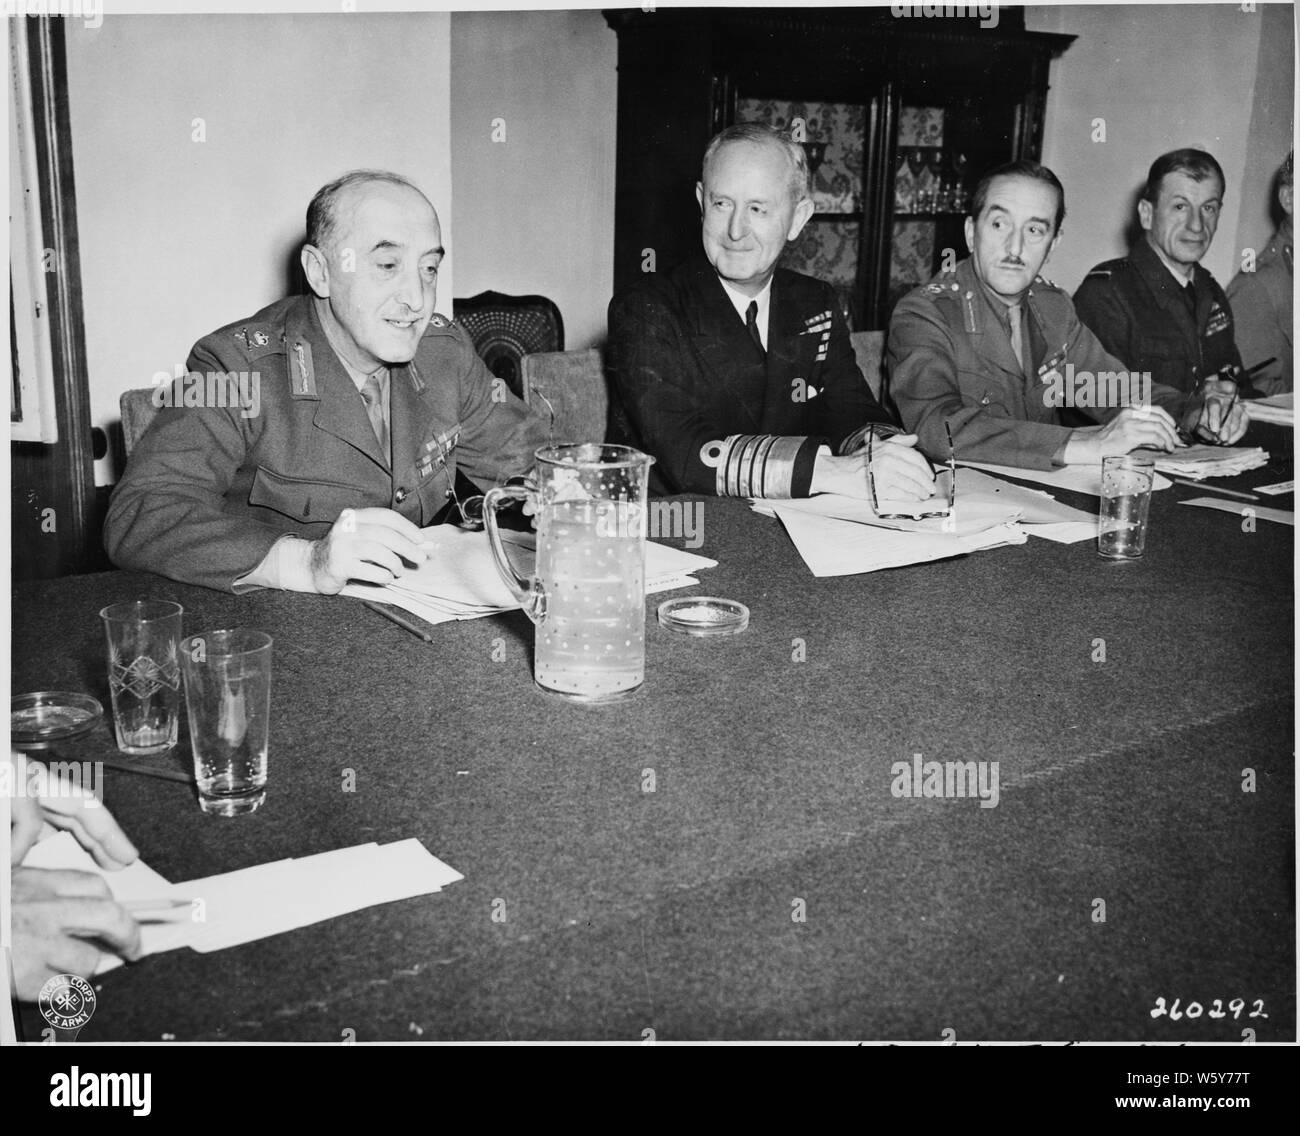 Taking a part in the Combined Chiefs of Staff discussions at the Potsdam Conference in Germany, L to R: Lt. Gen. Sir Gordon McCready, Admiral of the Fleet Sir Andrew Cunningham, and Field Marshal Sir Alan Brooke (British officers). Stock Photo